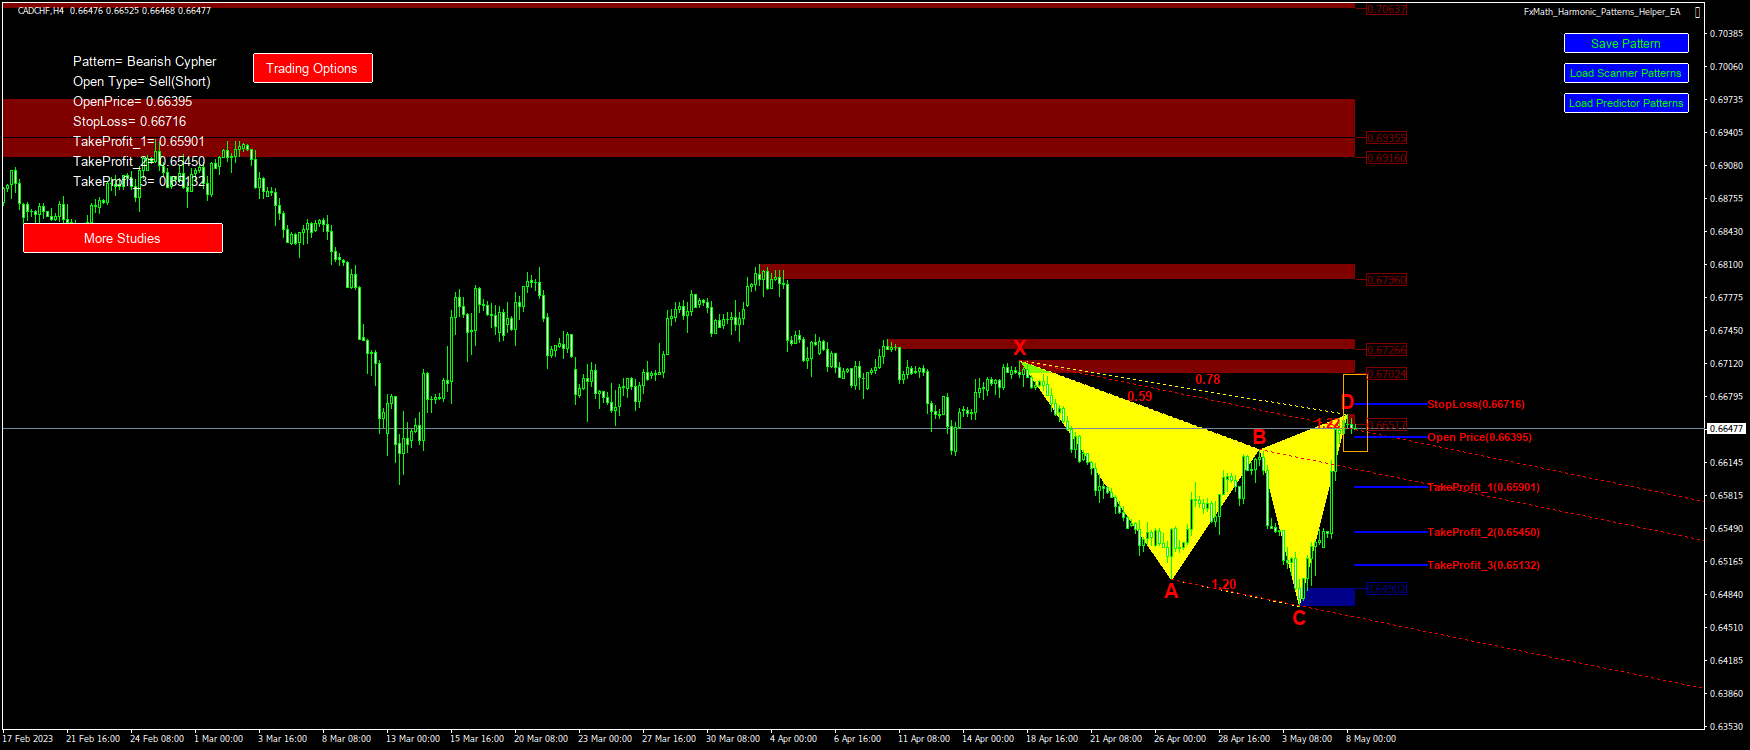 @CADCHF(H4)-Pattern: Cypher : SellStop@: 0.66395, StopLoss: 0.66716, TakeProfit_1: 0.65901, TakeProfit_2: 0.65450, TakeProfit_3: 0.65132-2023.05.08 09:20